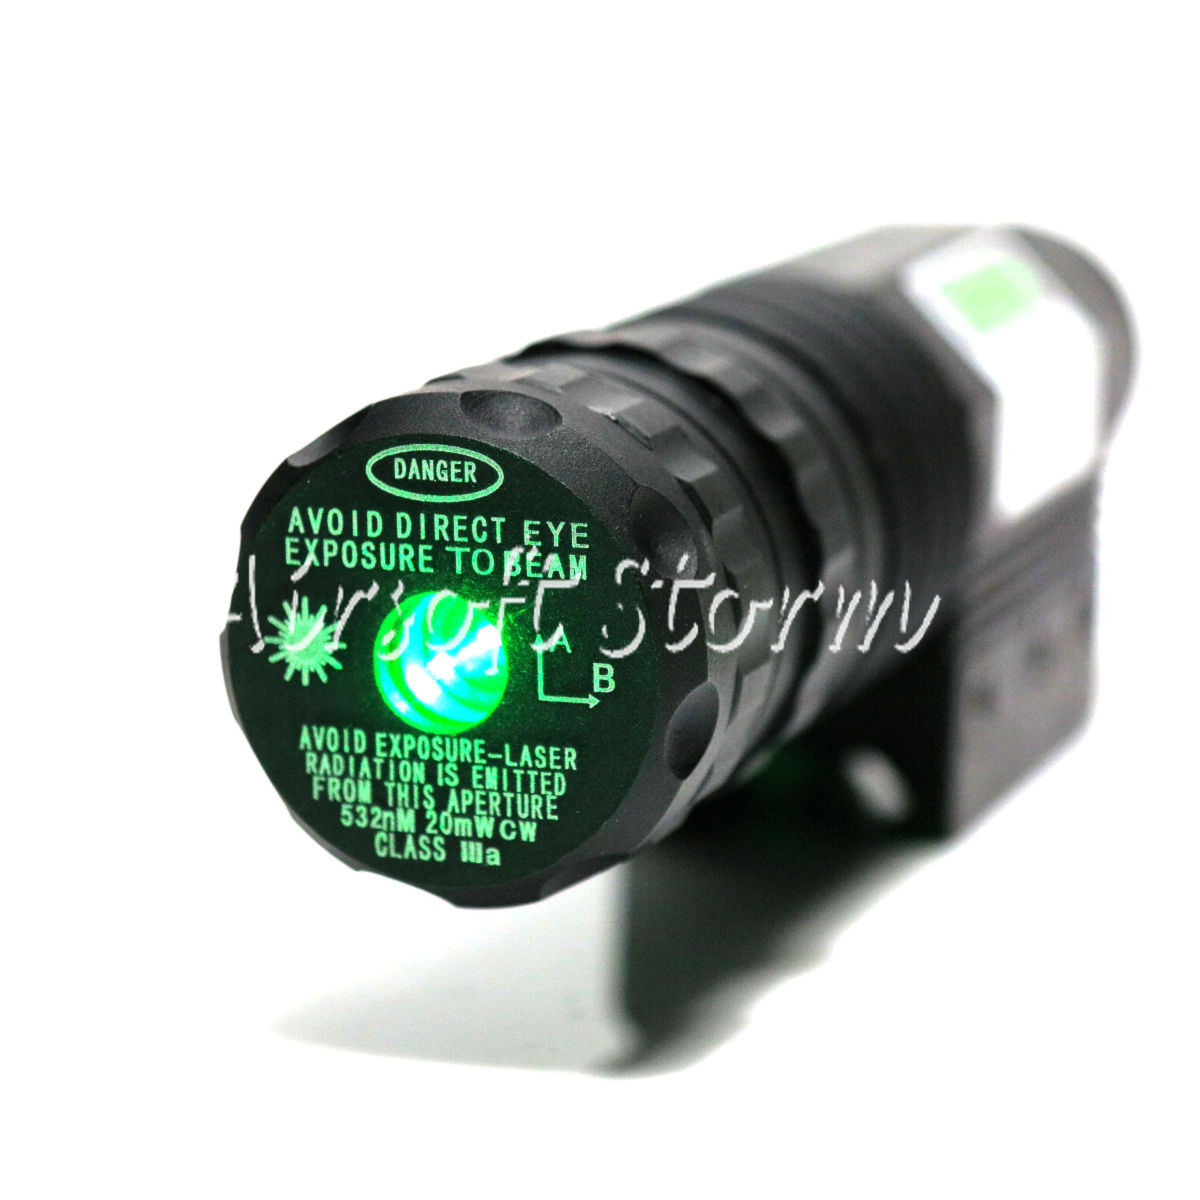 LXGD Tactical Gear High Power Visible Green Laser Sight Pointer JG-018 - Click Image to Close